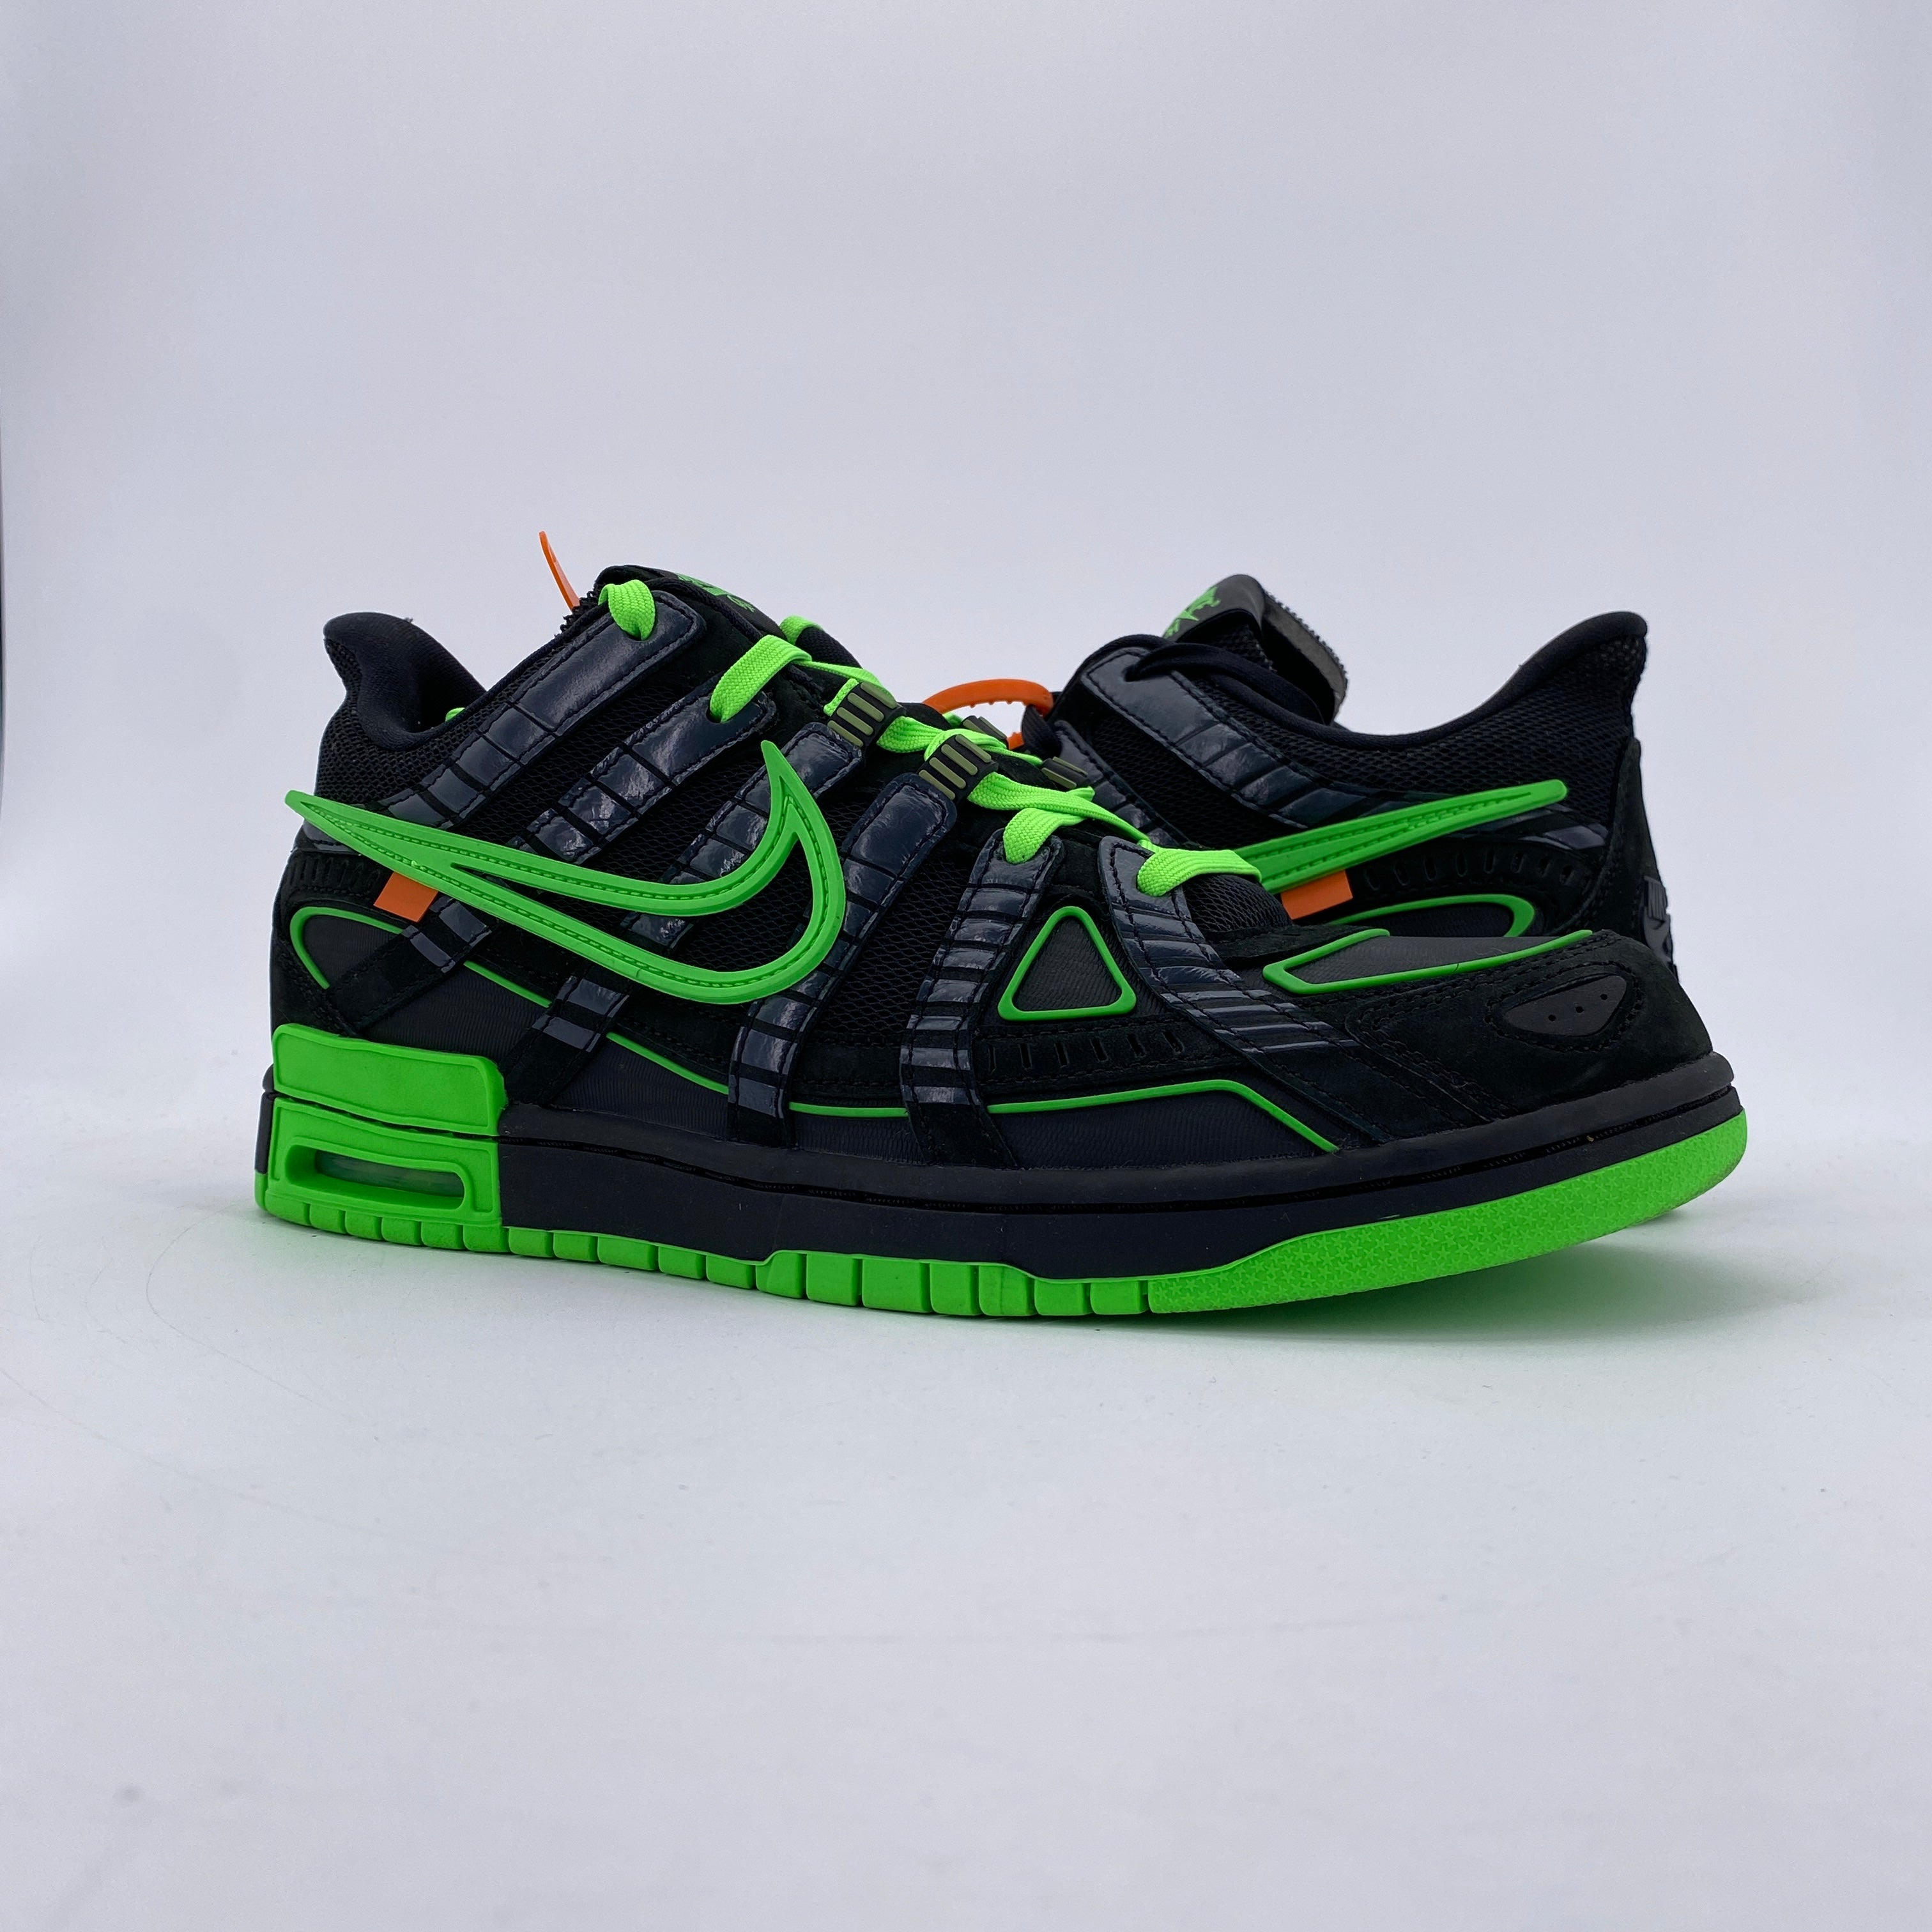 Nike Air Rubber Dunk / OW Green Strike 2020 Size 10.5 – SOLED OUT JC